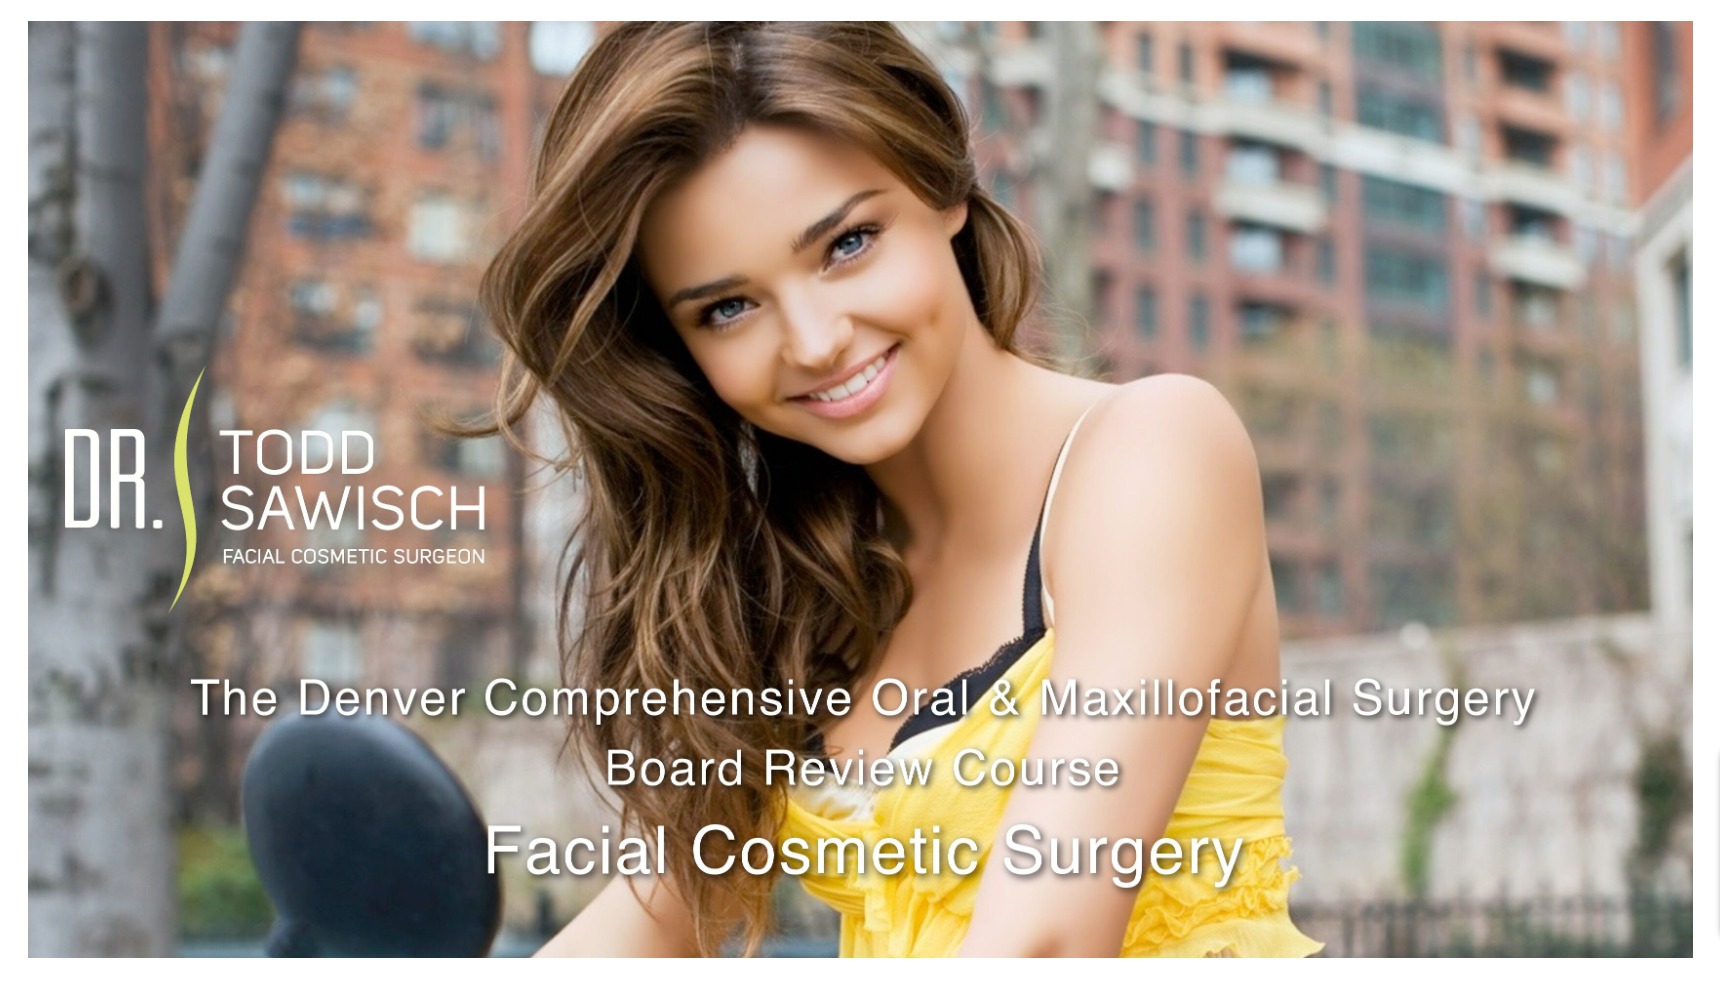 Facial Cosmetic Surgery, Patient Selection, Various Approaches, Avoidance of Complications